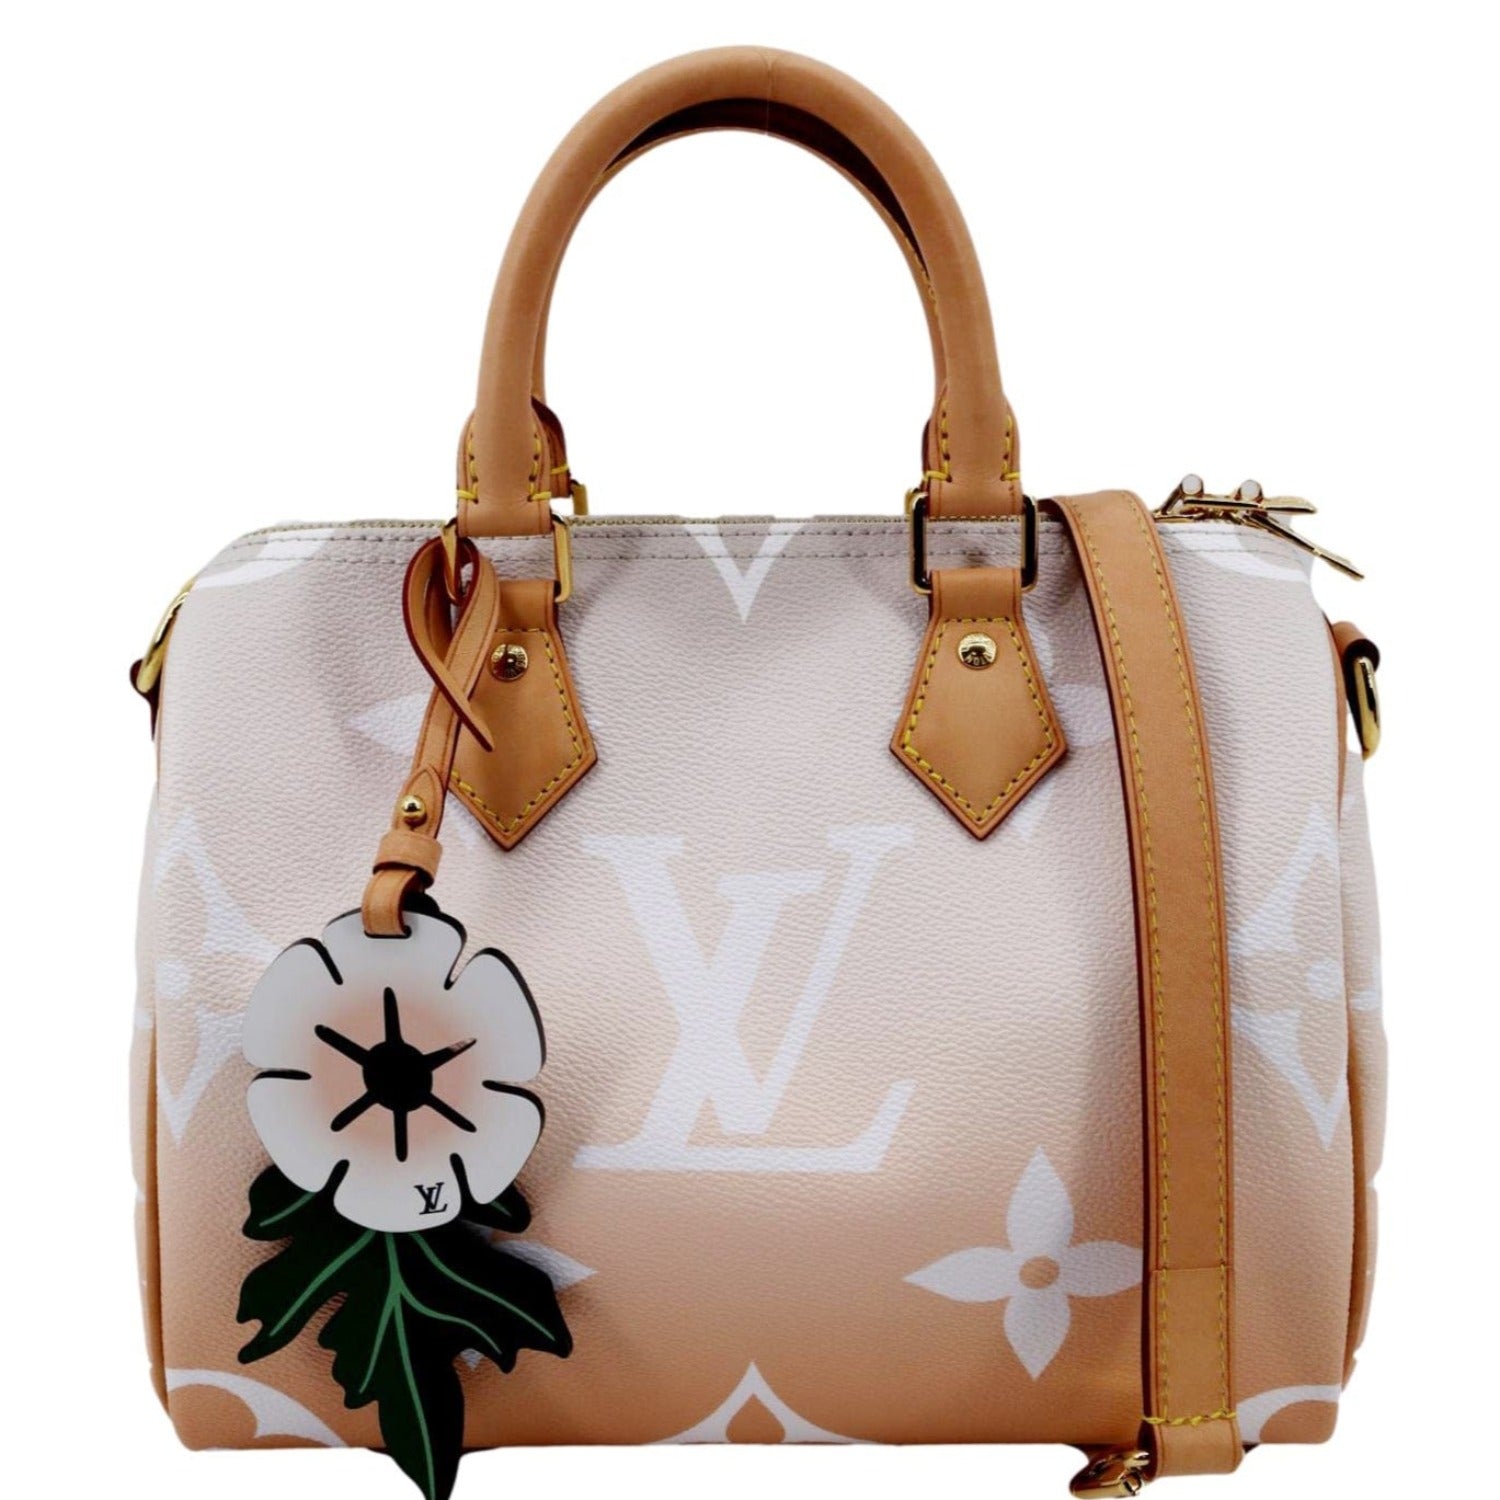 Louis Vuitton Speedy 25 Bandouliere By The Pool Brume Mist Gray NEW IN BOX